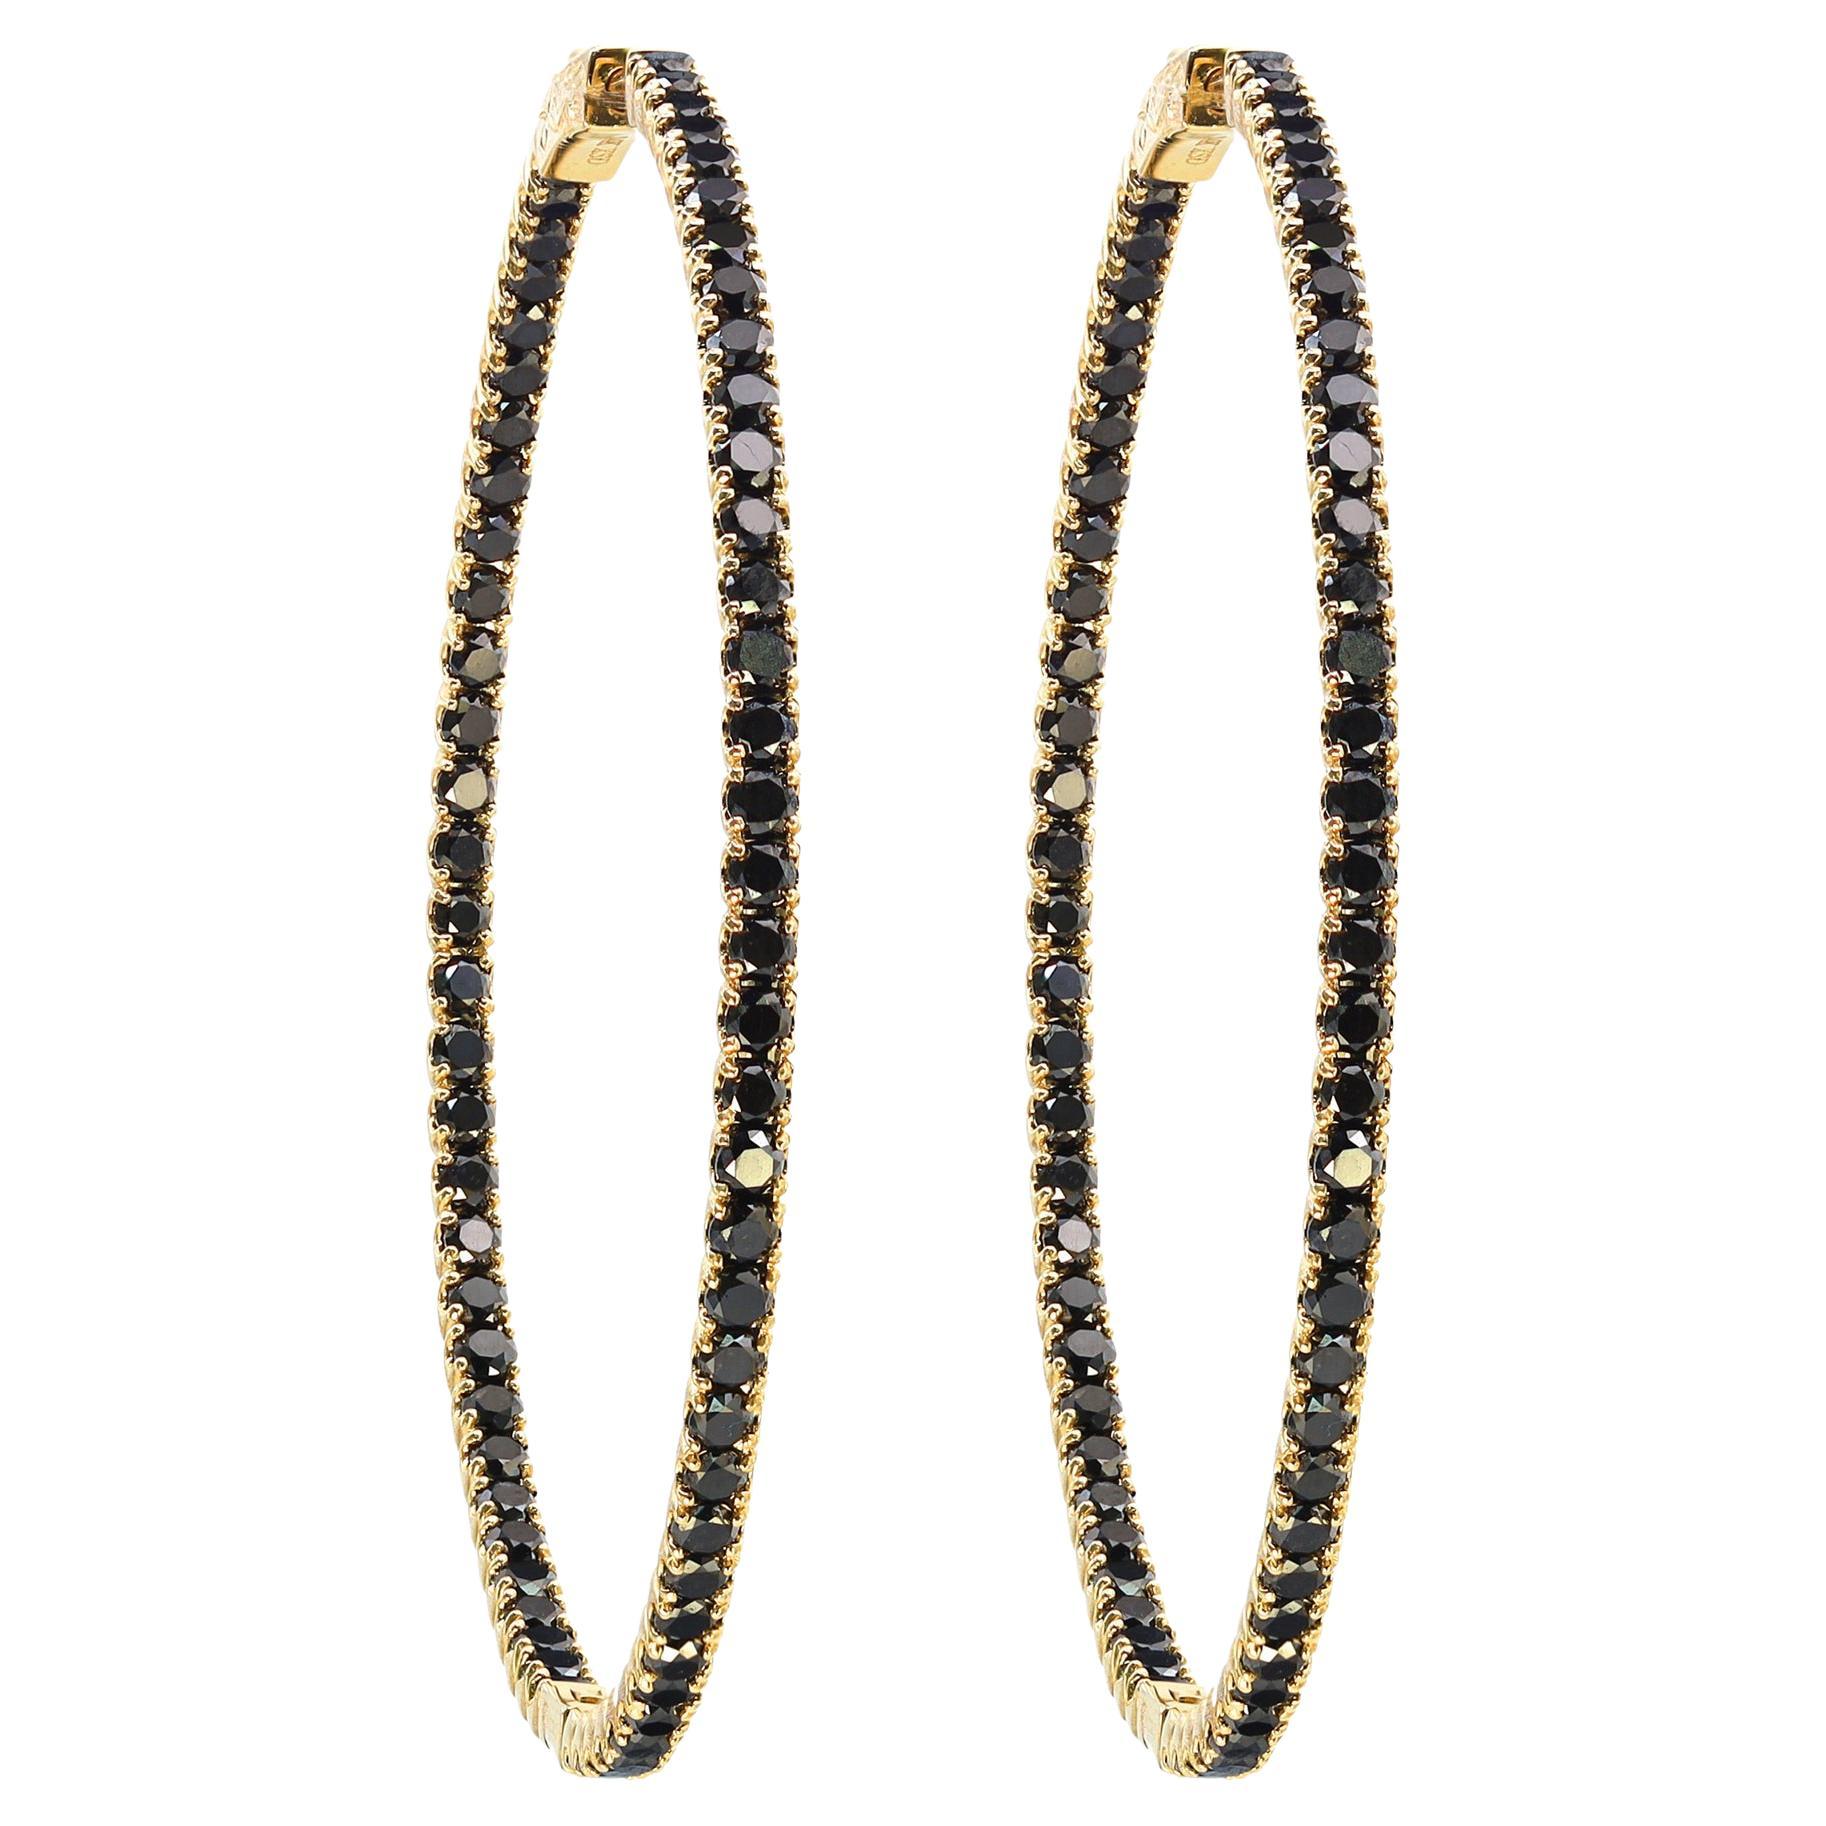 Inside Out Black Diamond Large Hoop Earrings 14K Yellow Gold 4.85cttw For Sale